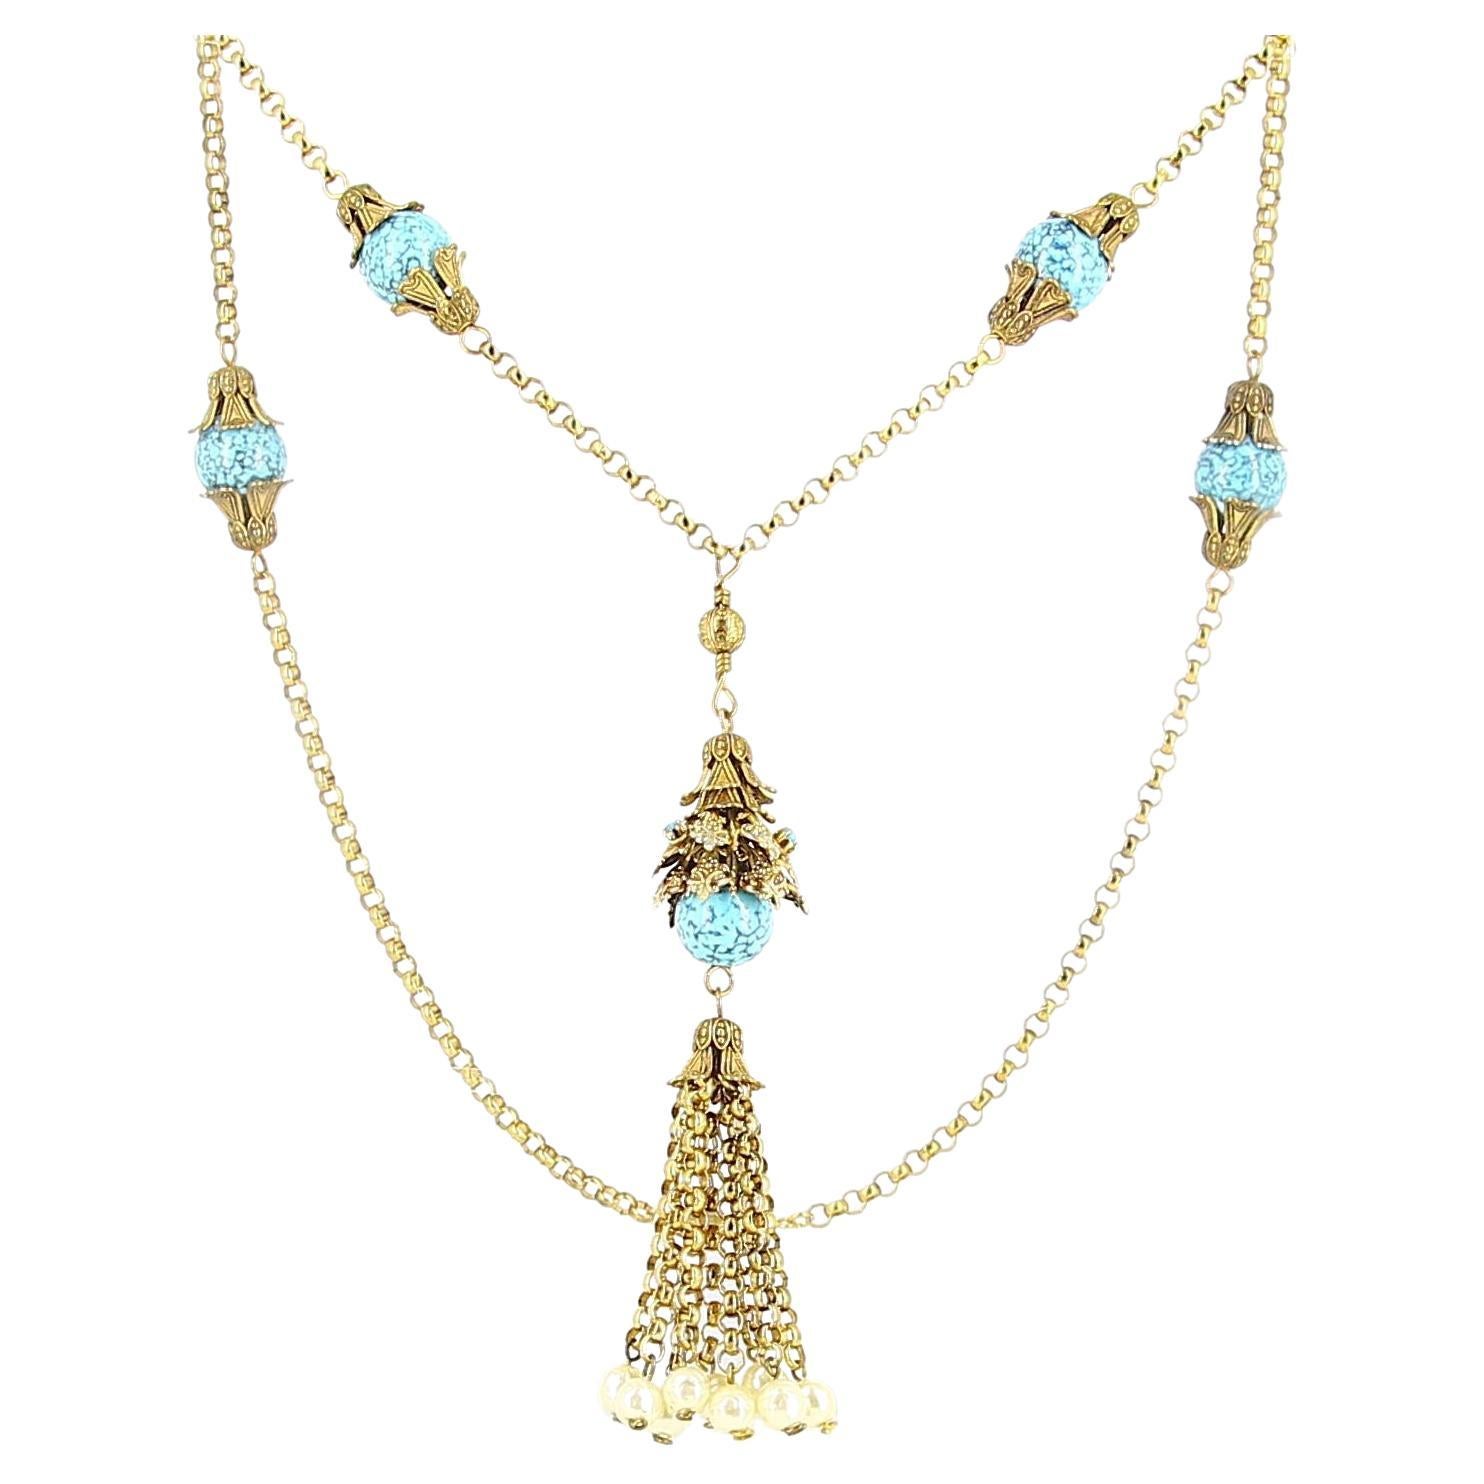 Chanel Gold and Turquoise Fantasy Necklace